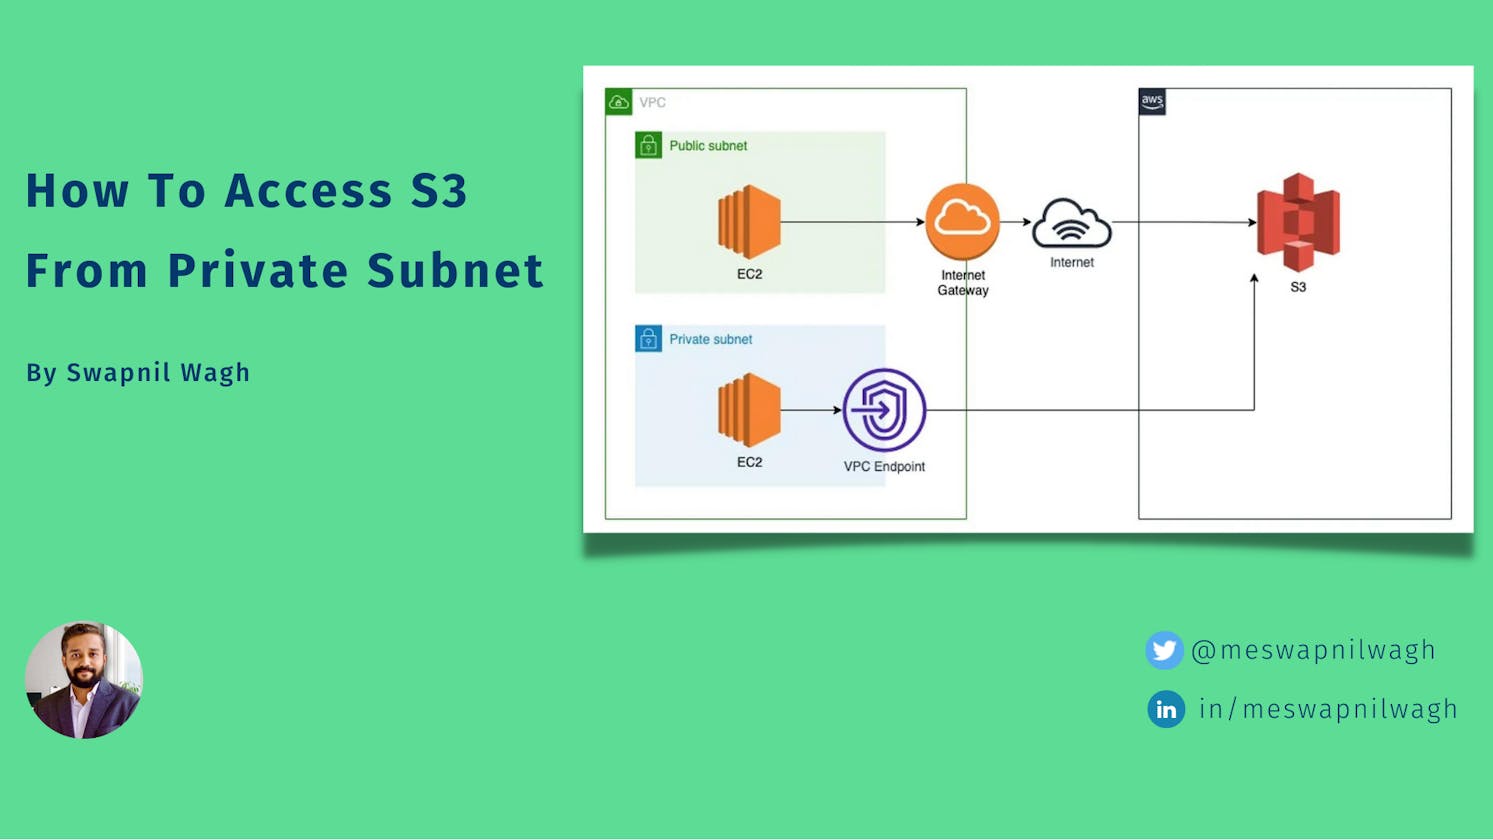 How To Access S3 From Private Subnet